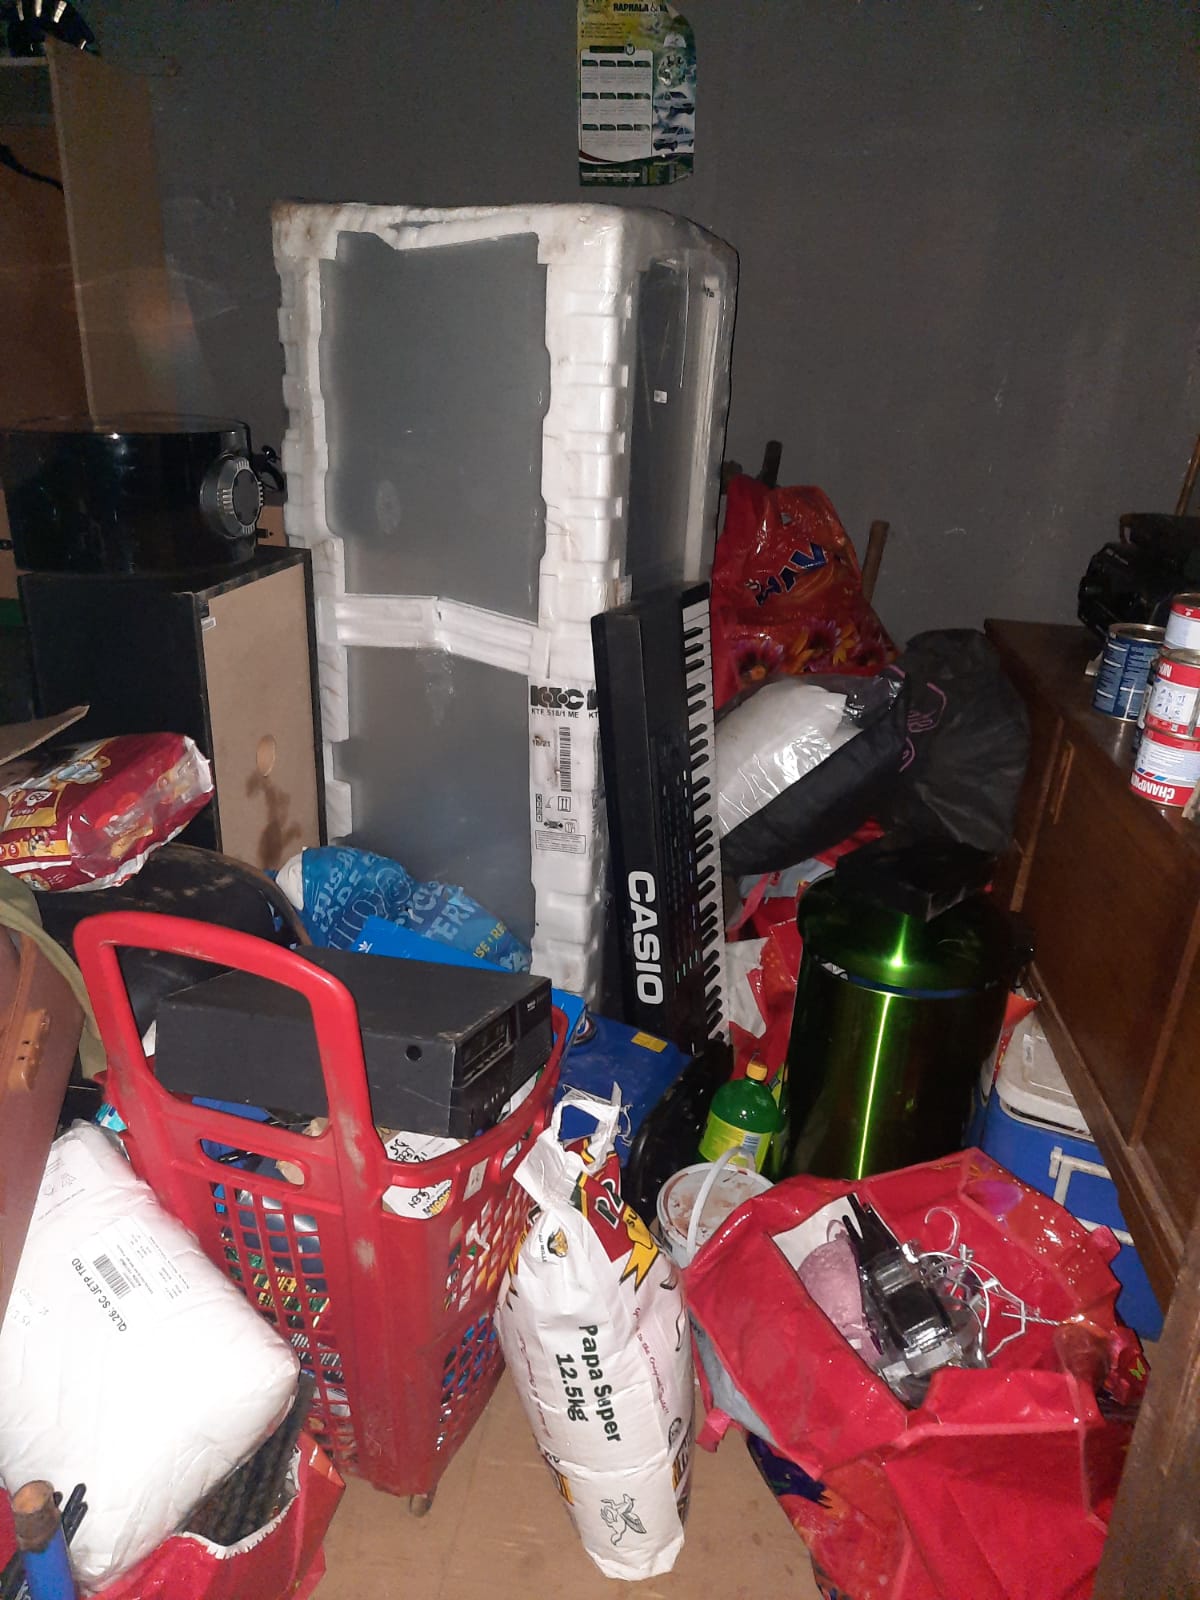 Cops found with looted items